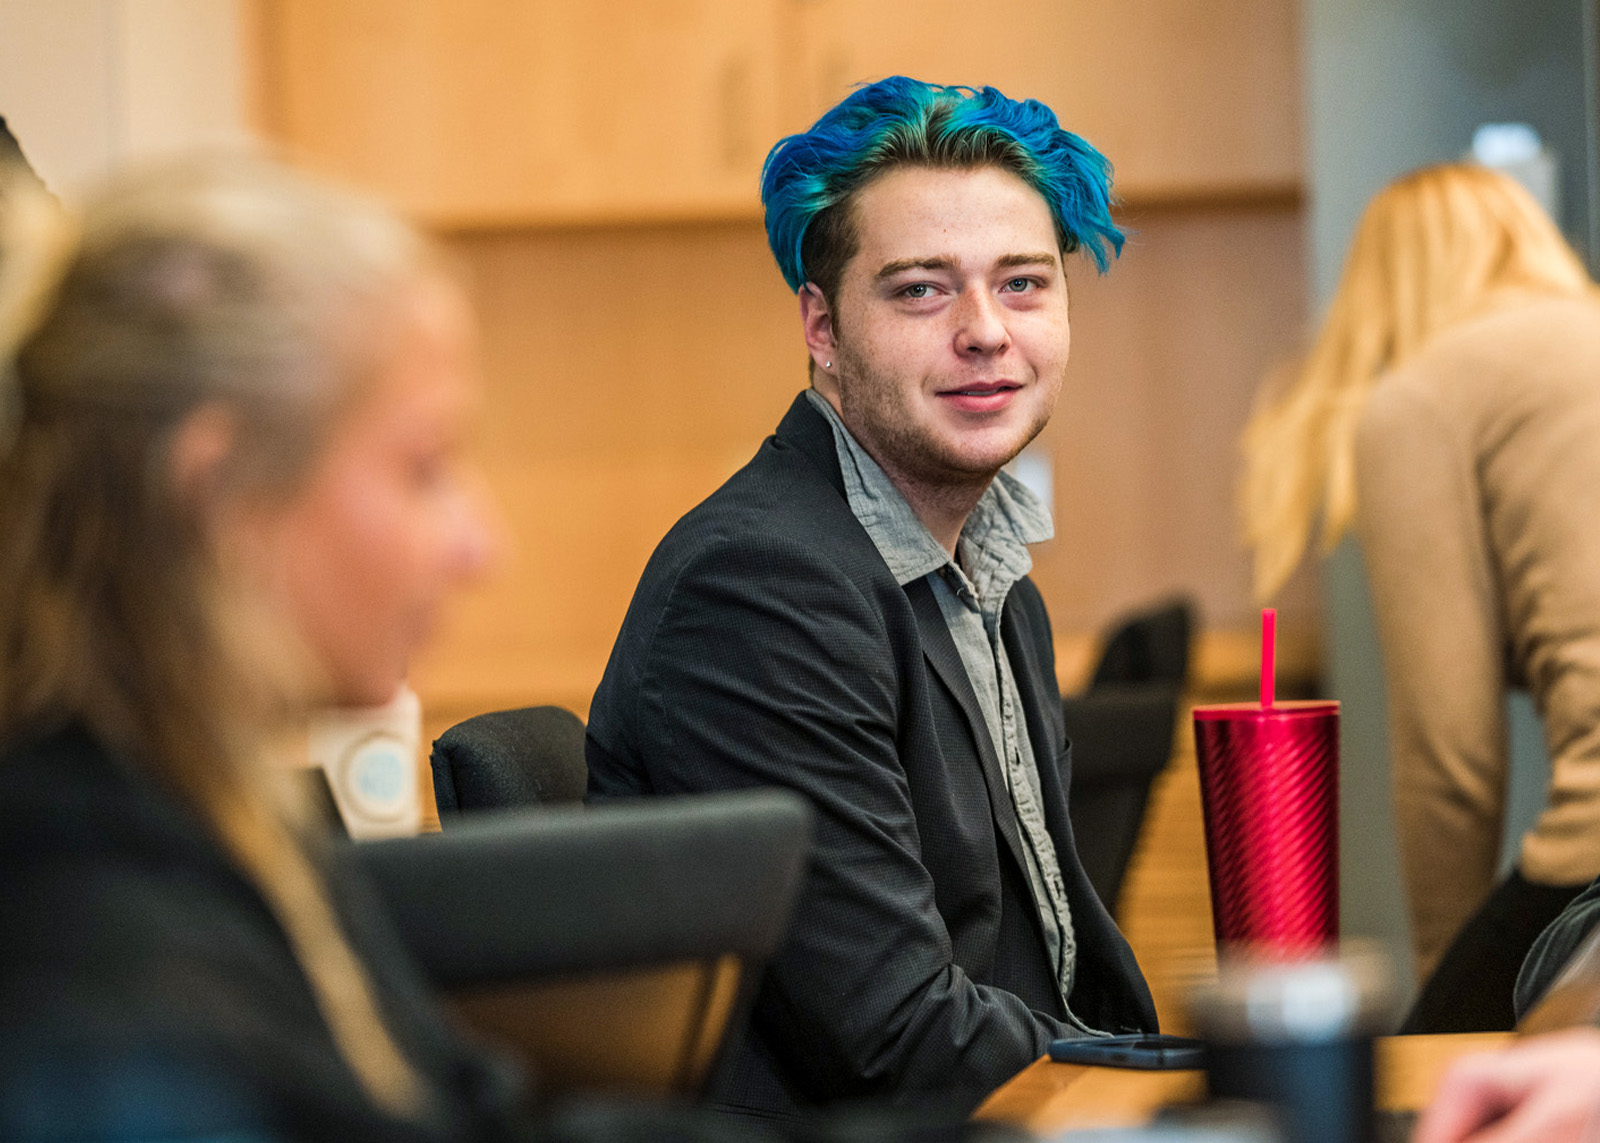 student with blue hair looks at the camera